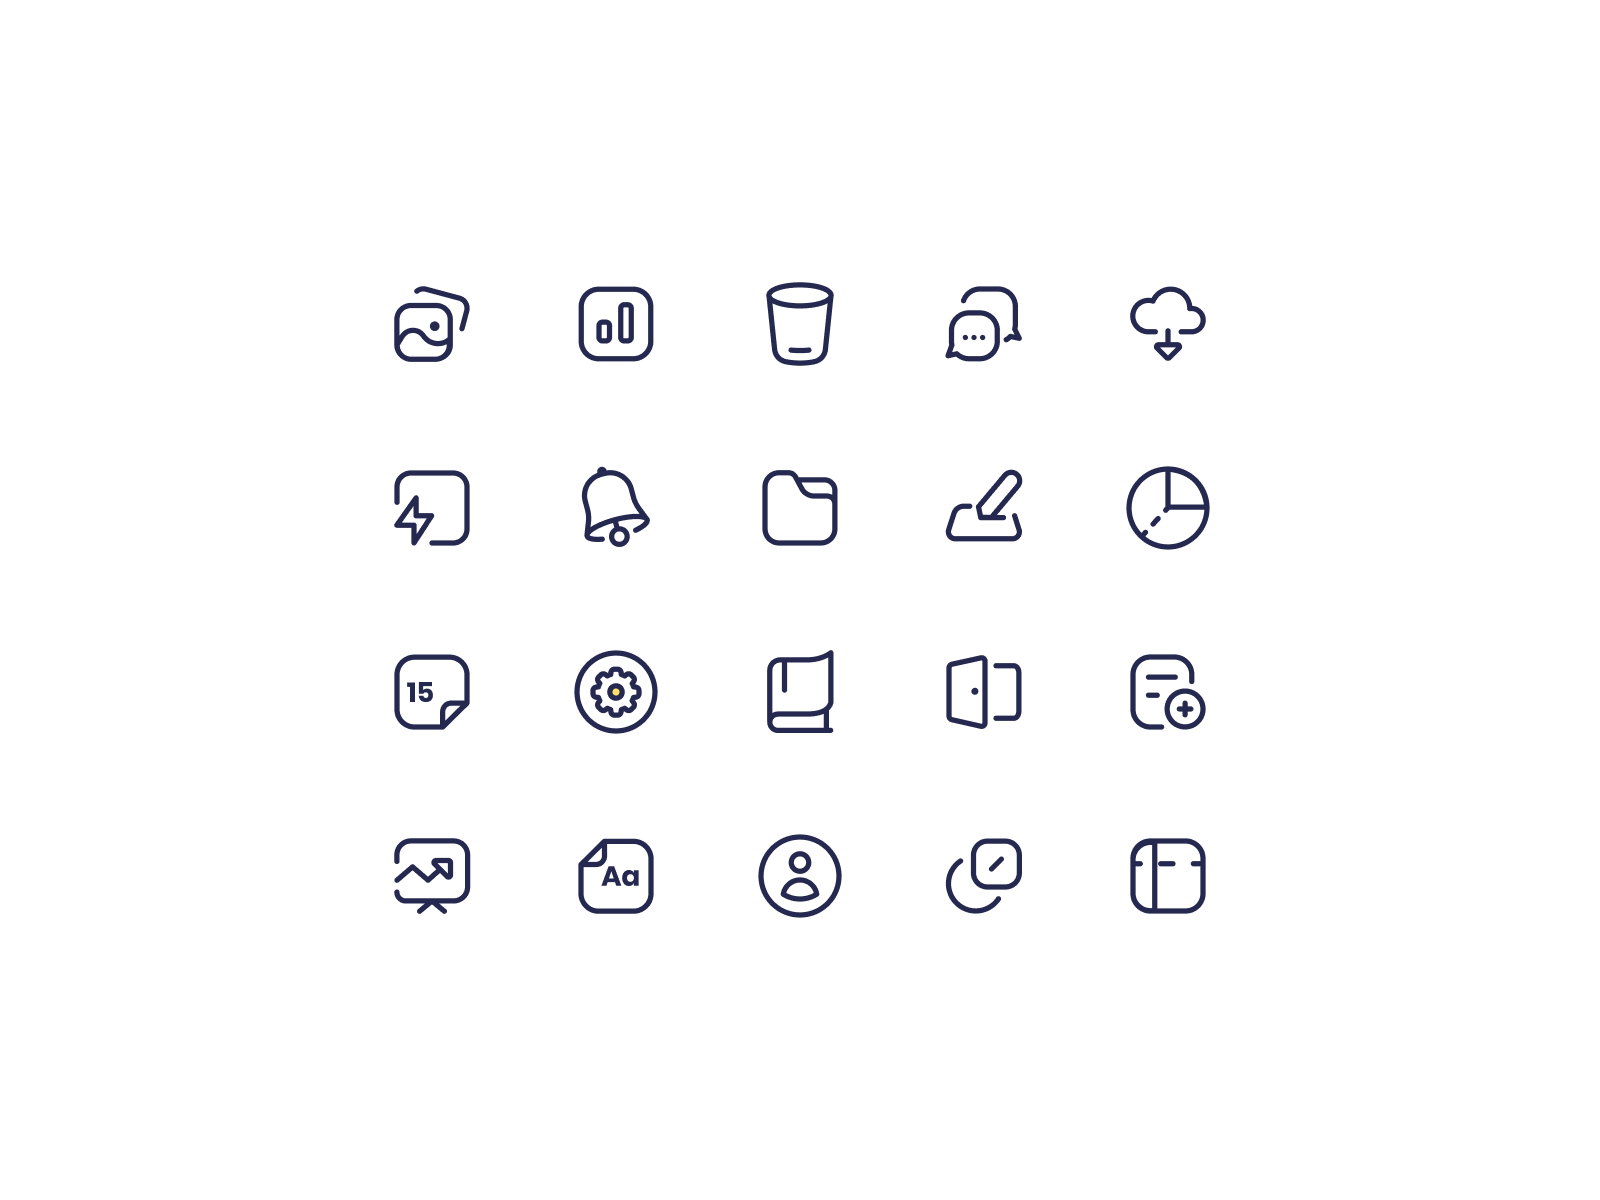 Icons - Exploration design explorations filled icons filled outline icon icon design icon set iconography minimal outline icons simple